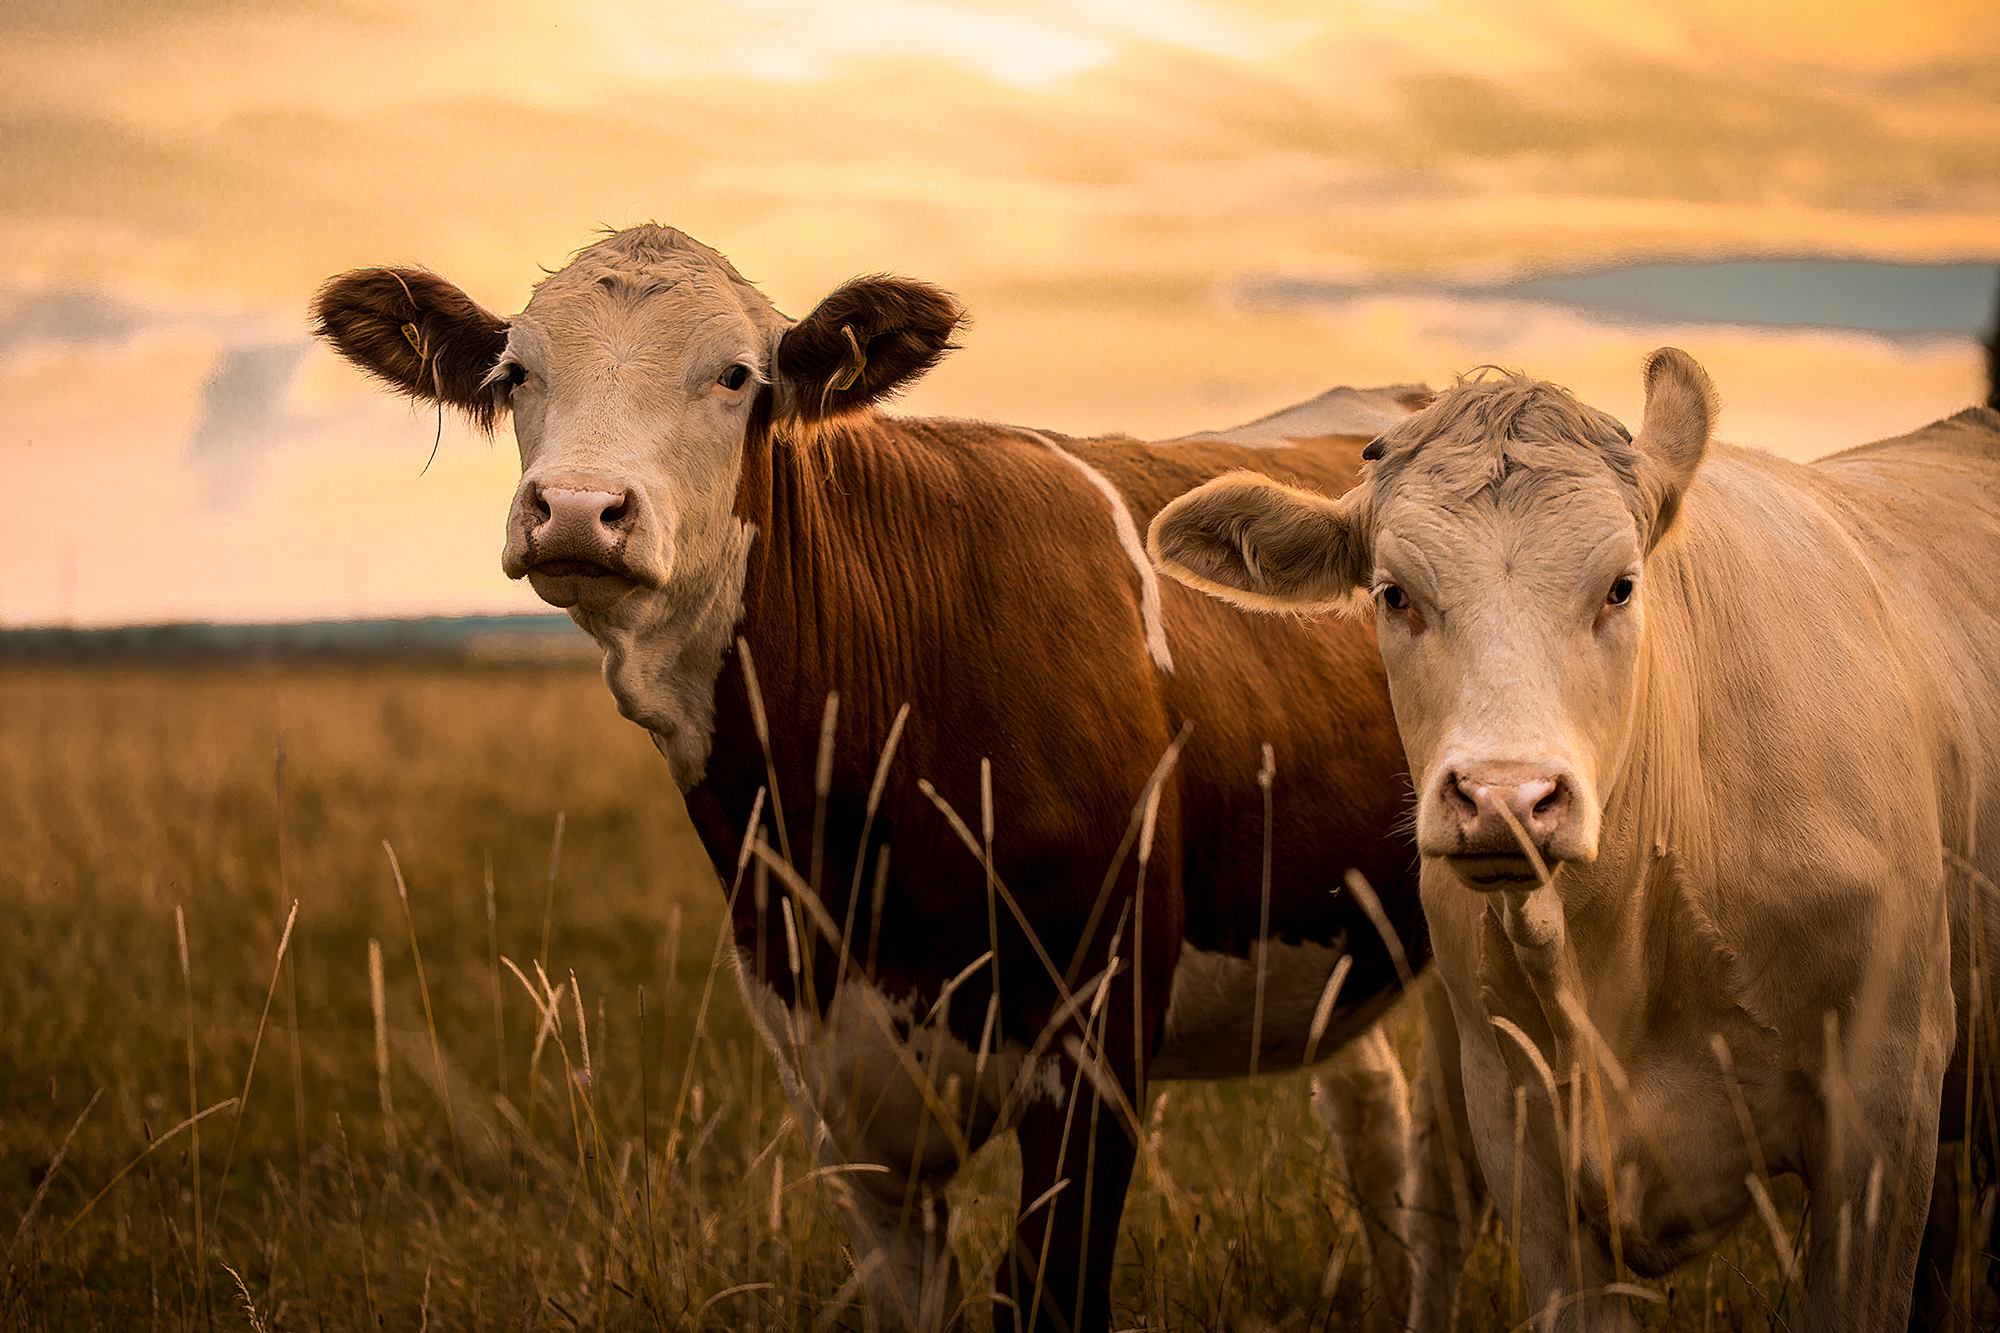 Photo of two cows in a field.